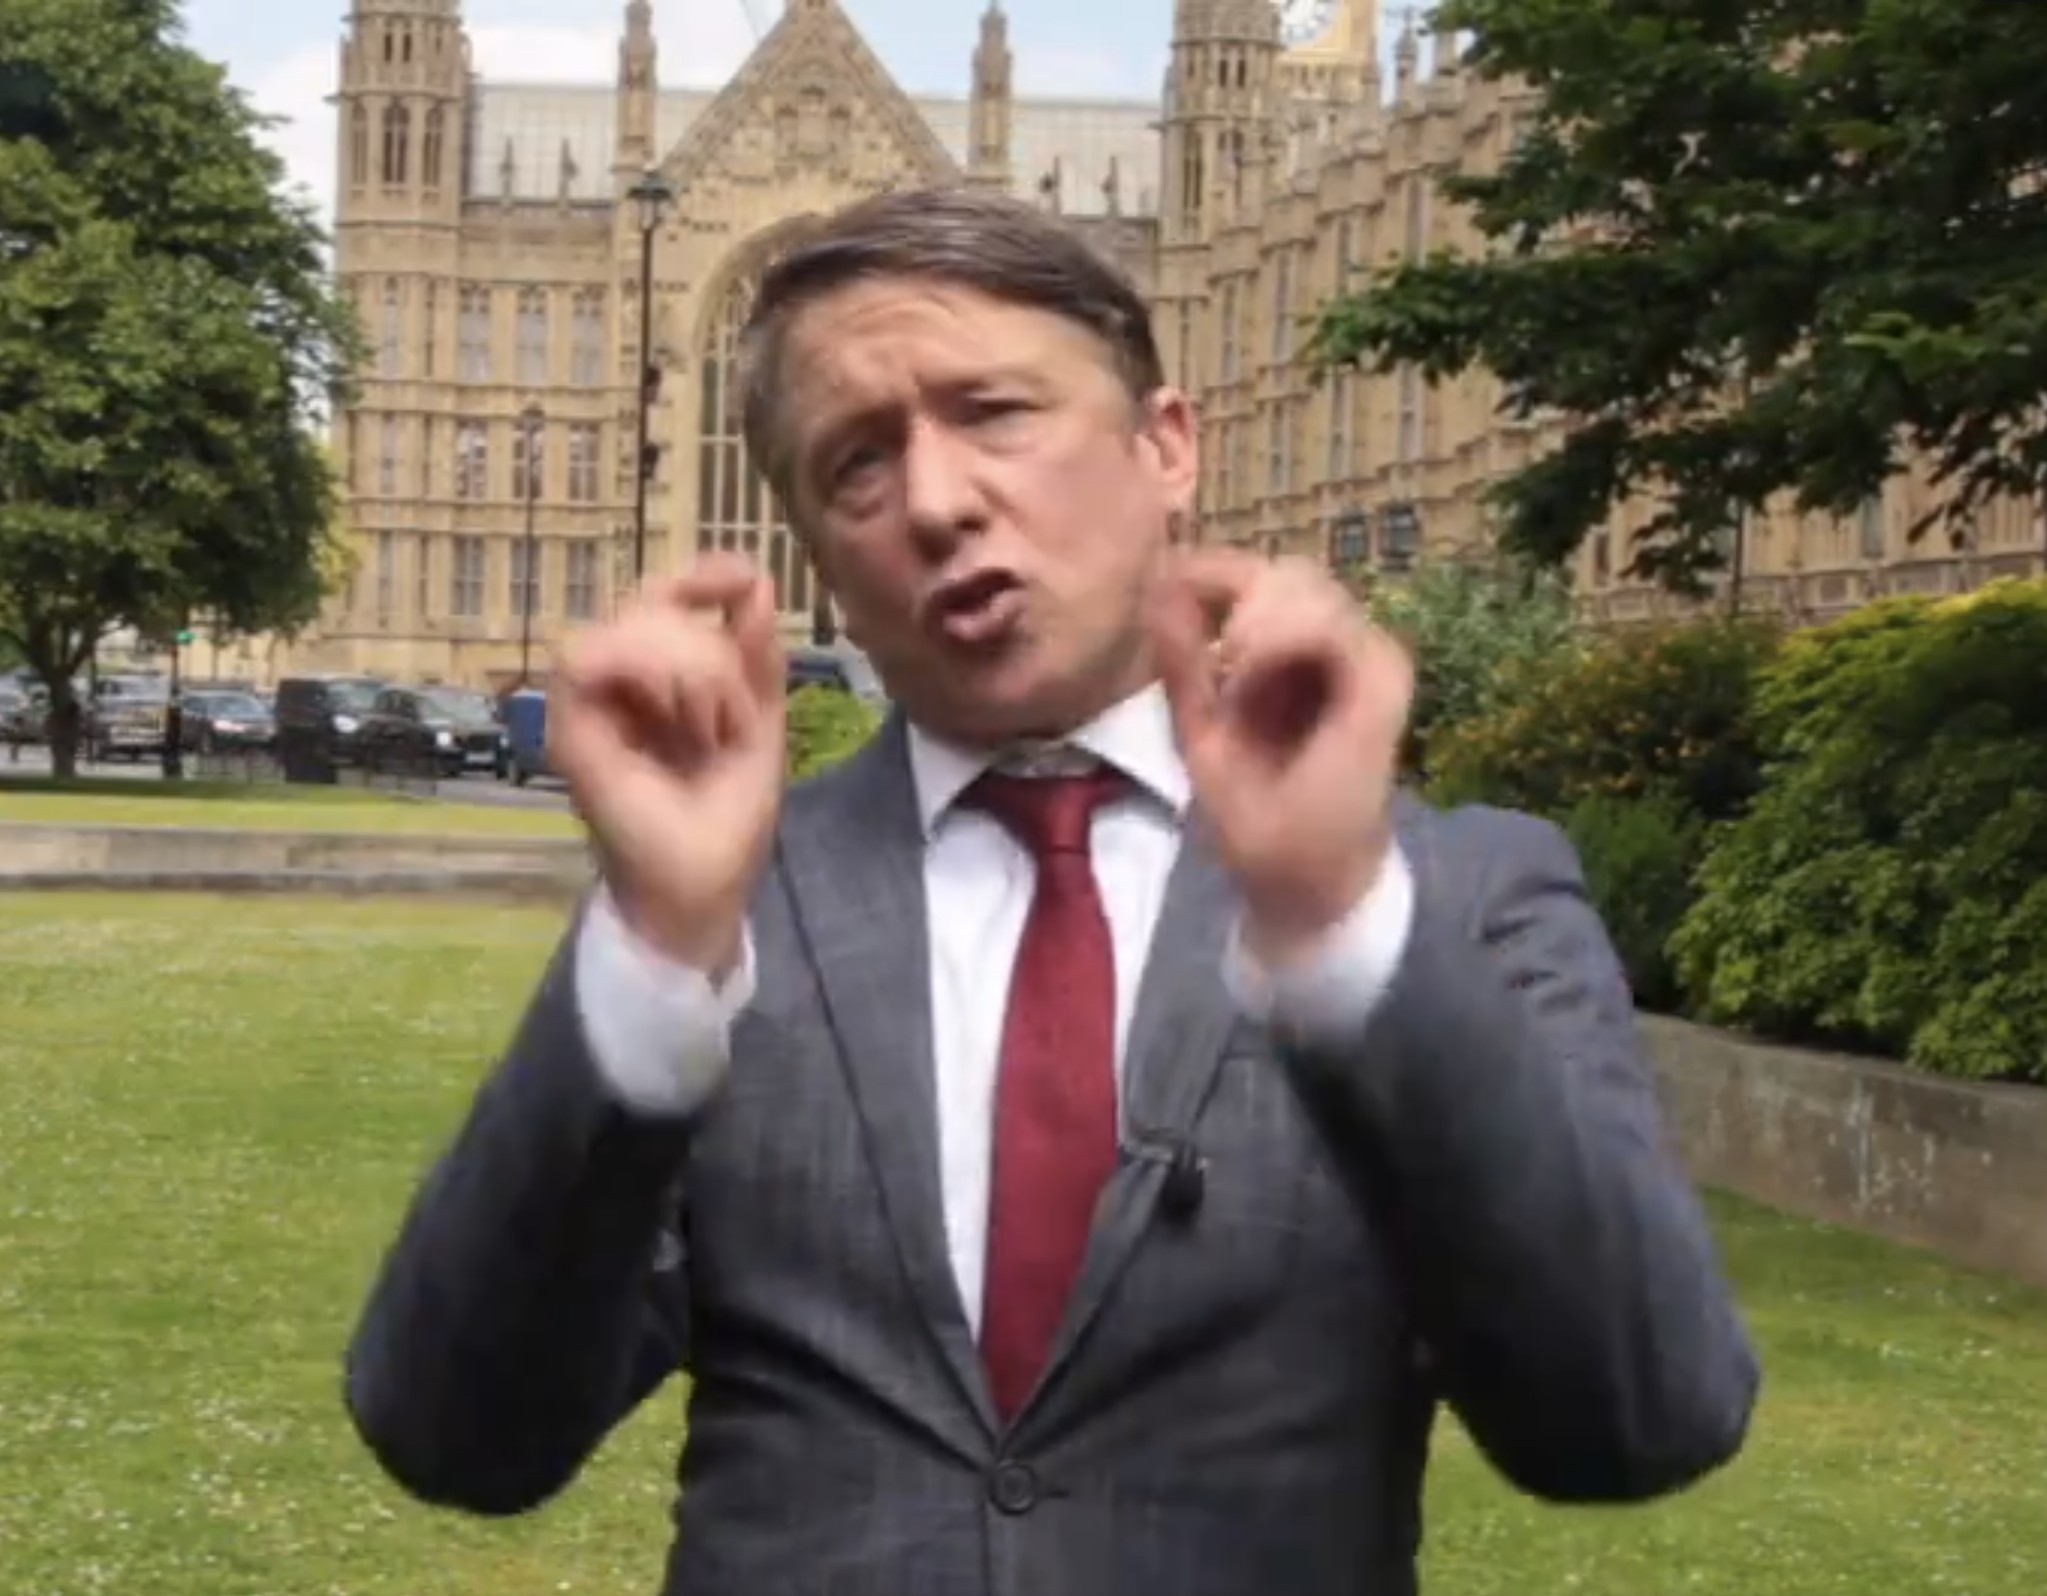 Jonathan Pie’s pre-election broadcast dubbed a ‘work of art’